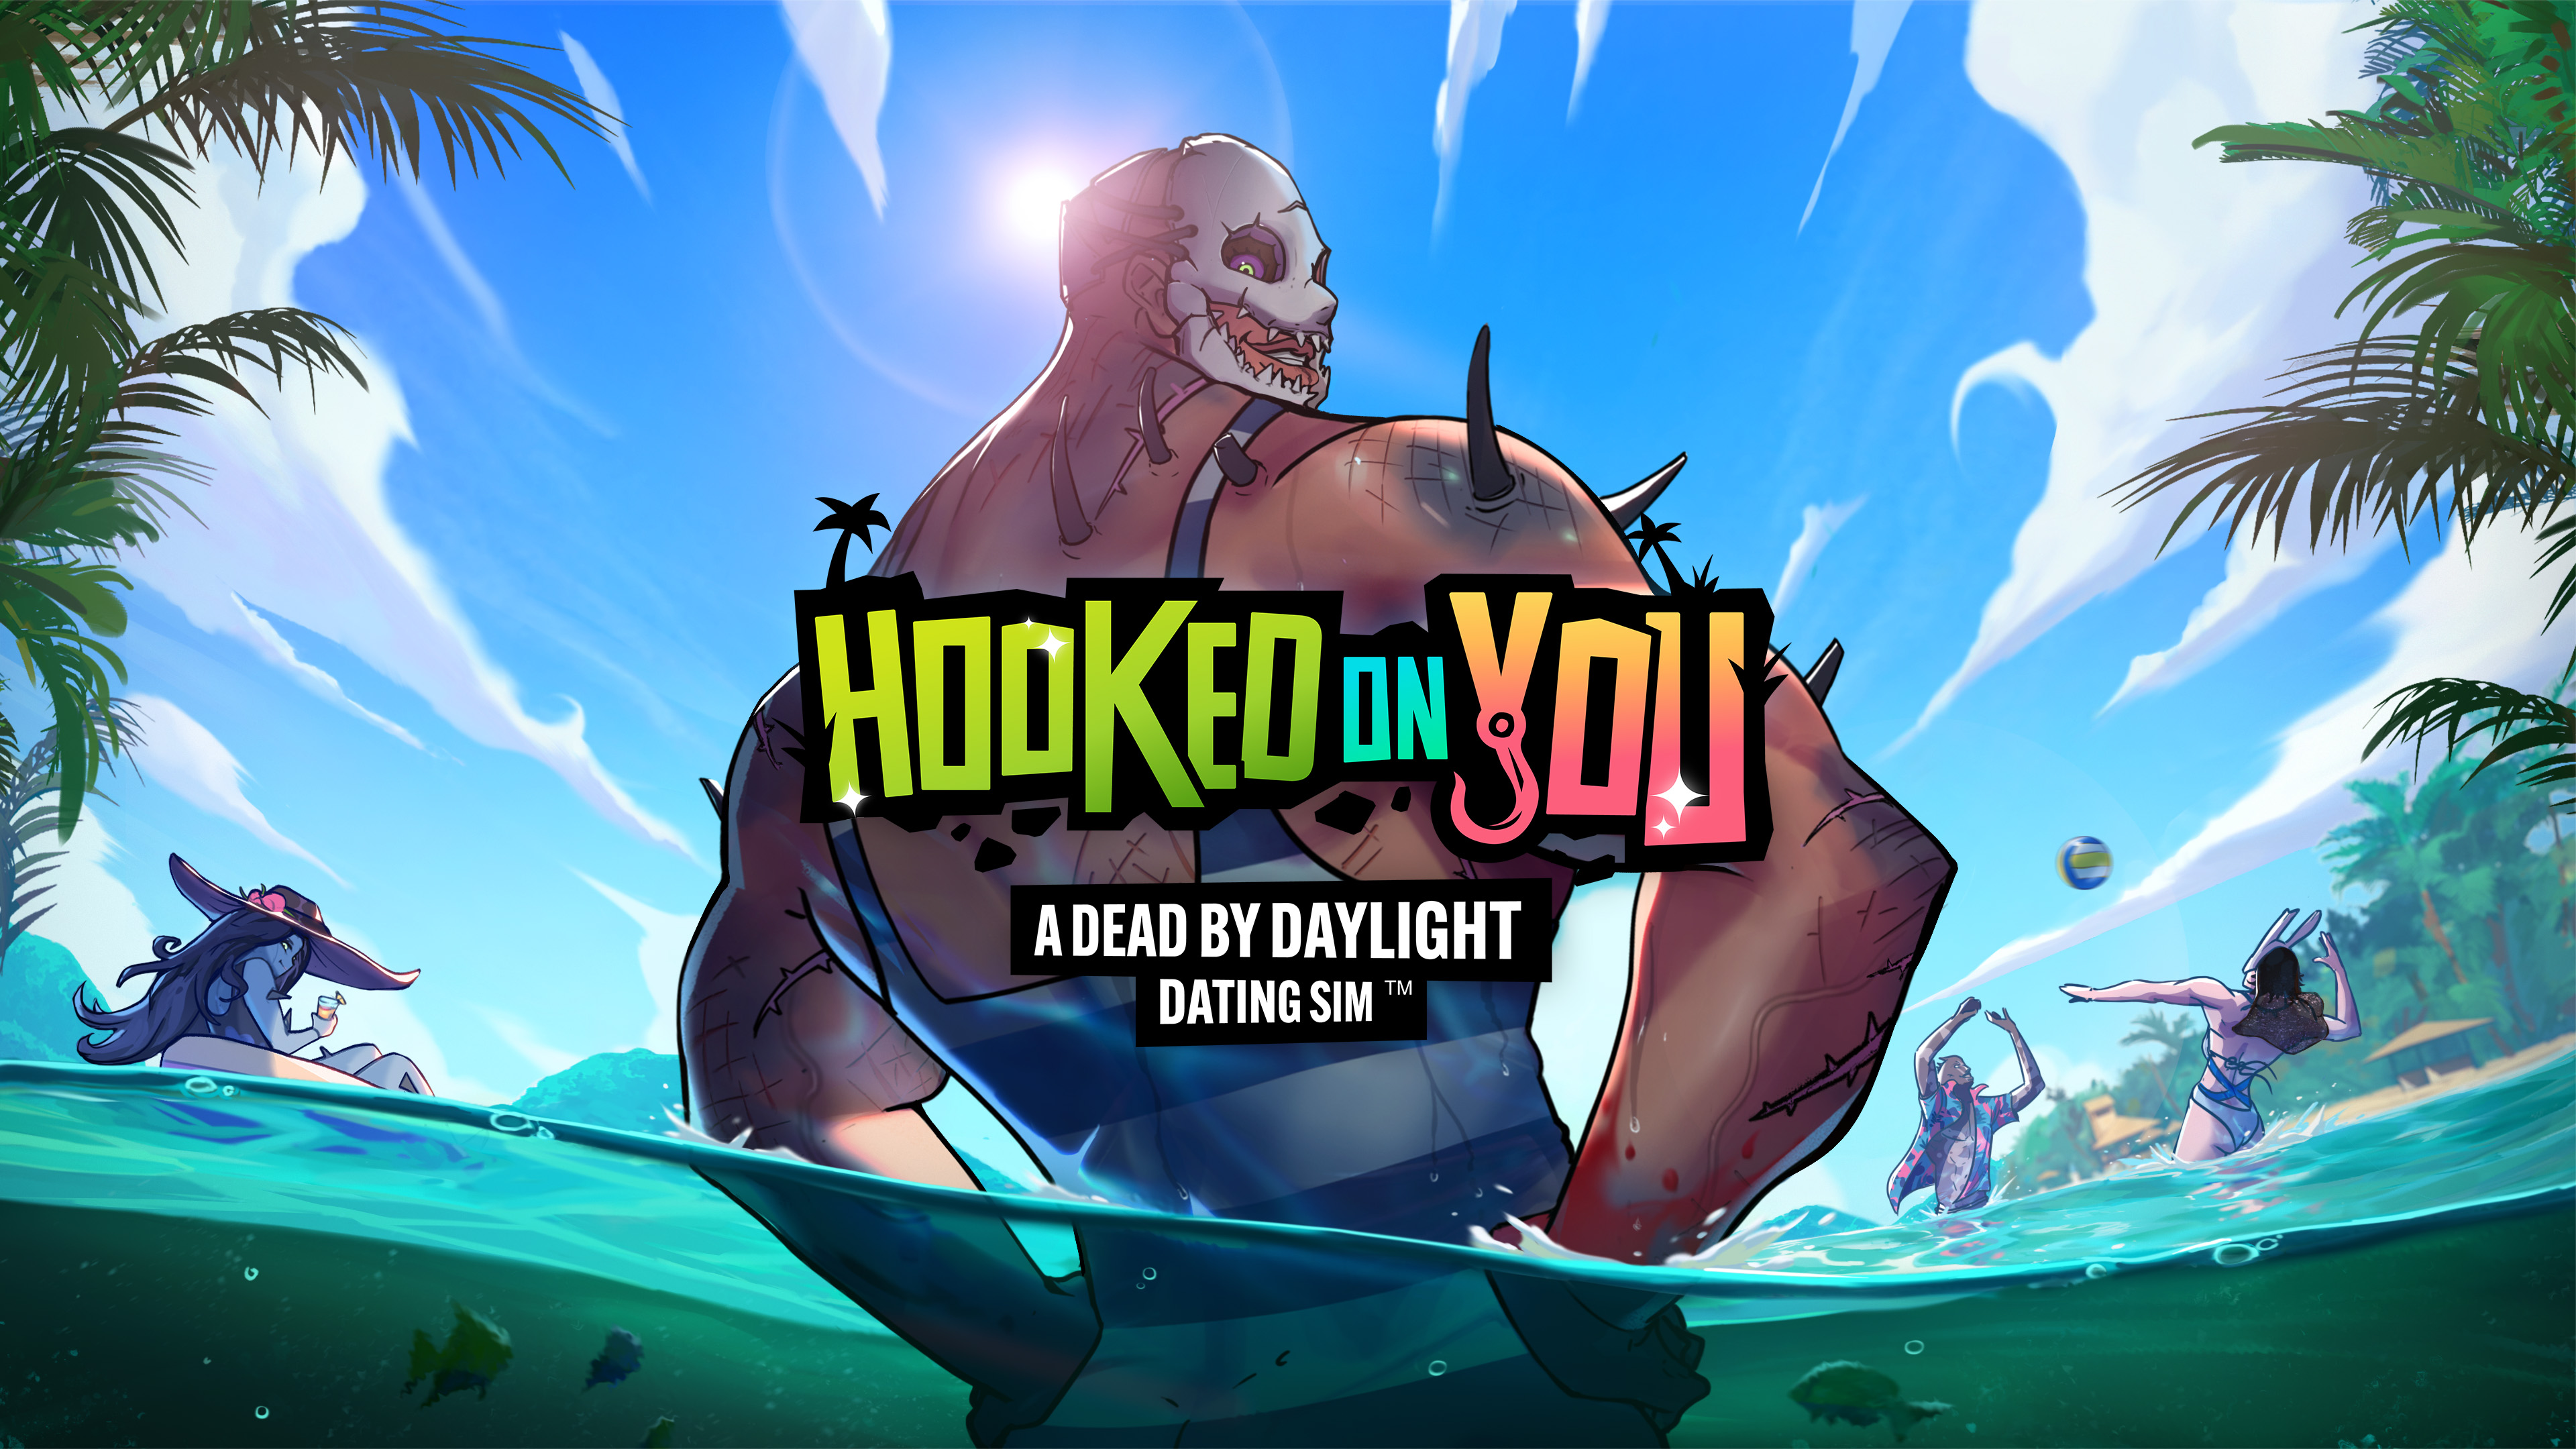 Dead by Daylight: Hooked on You ist eine Dating-Simulation der Col. Sanders-Leute